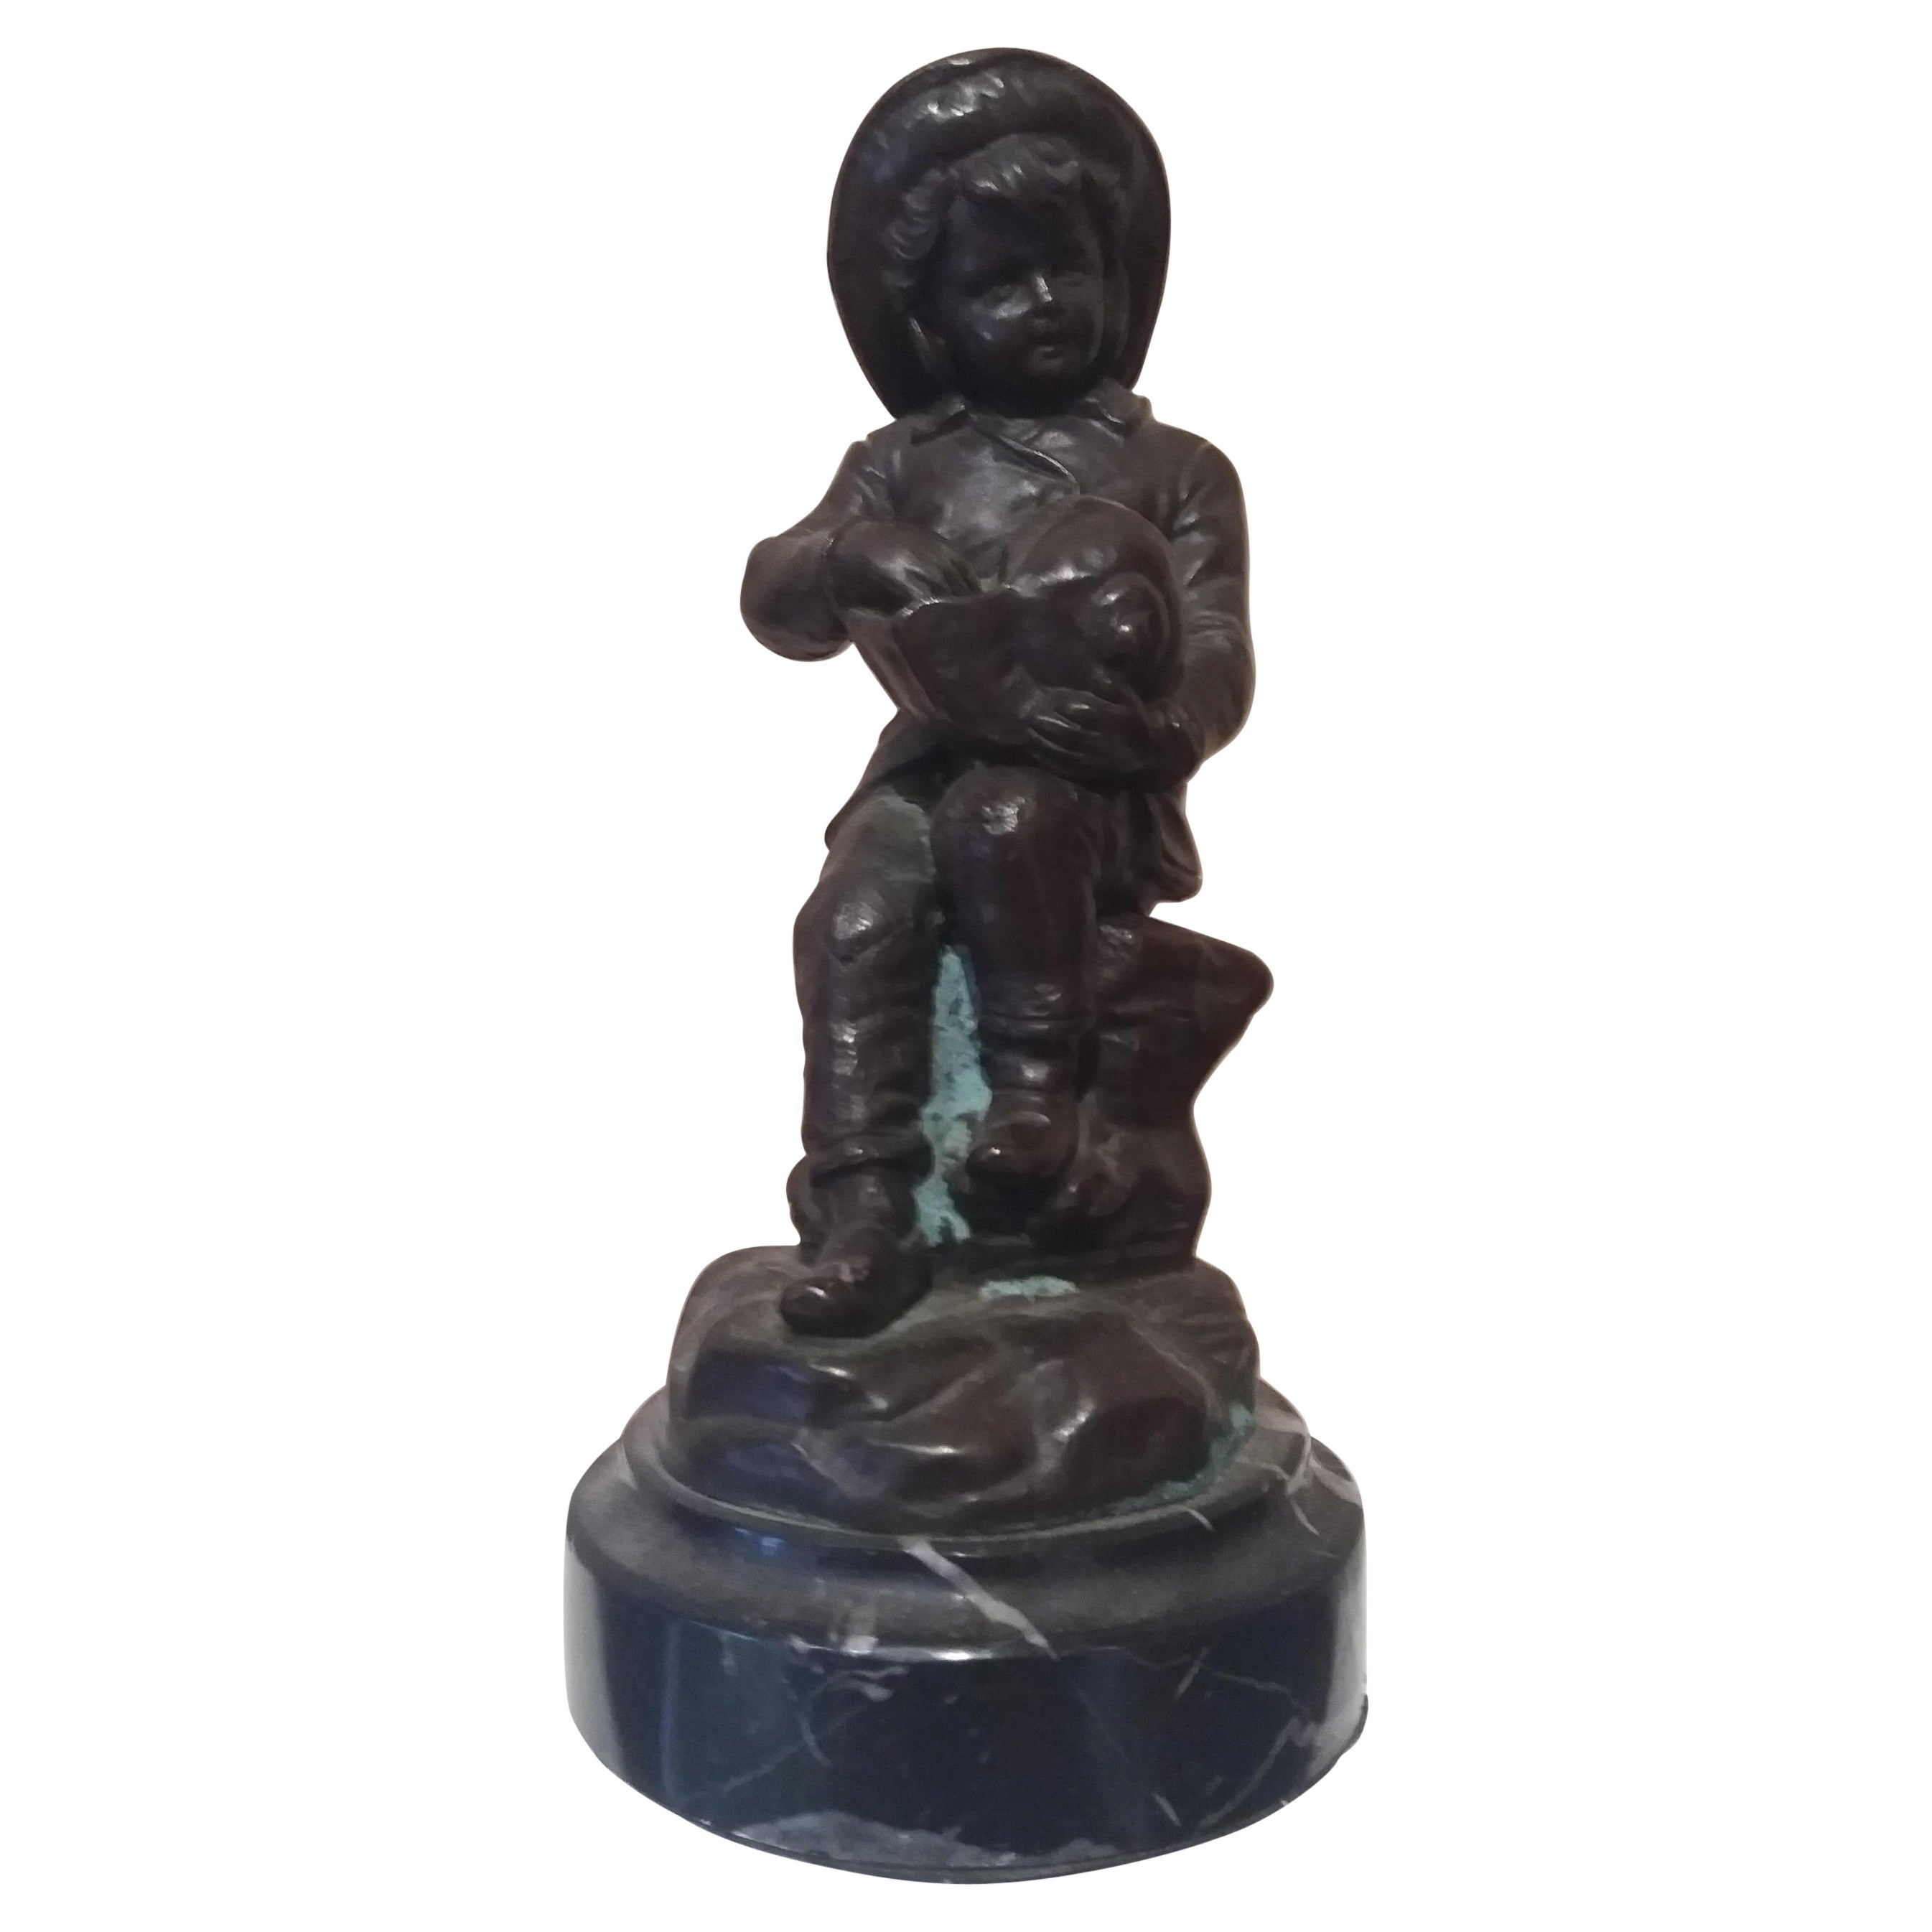  Bollel  Child and conch shell. Original multiple bronze sculpture